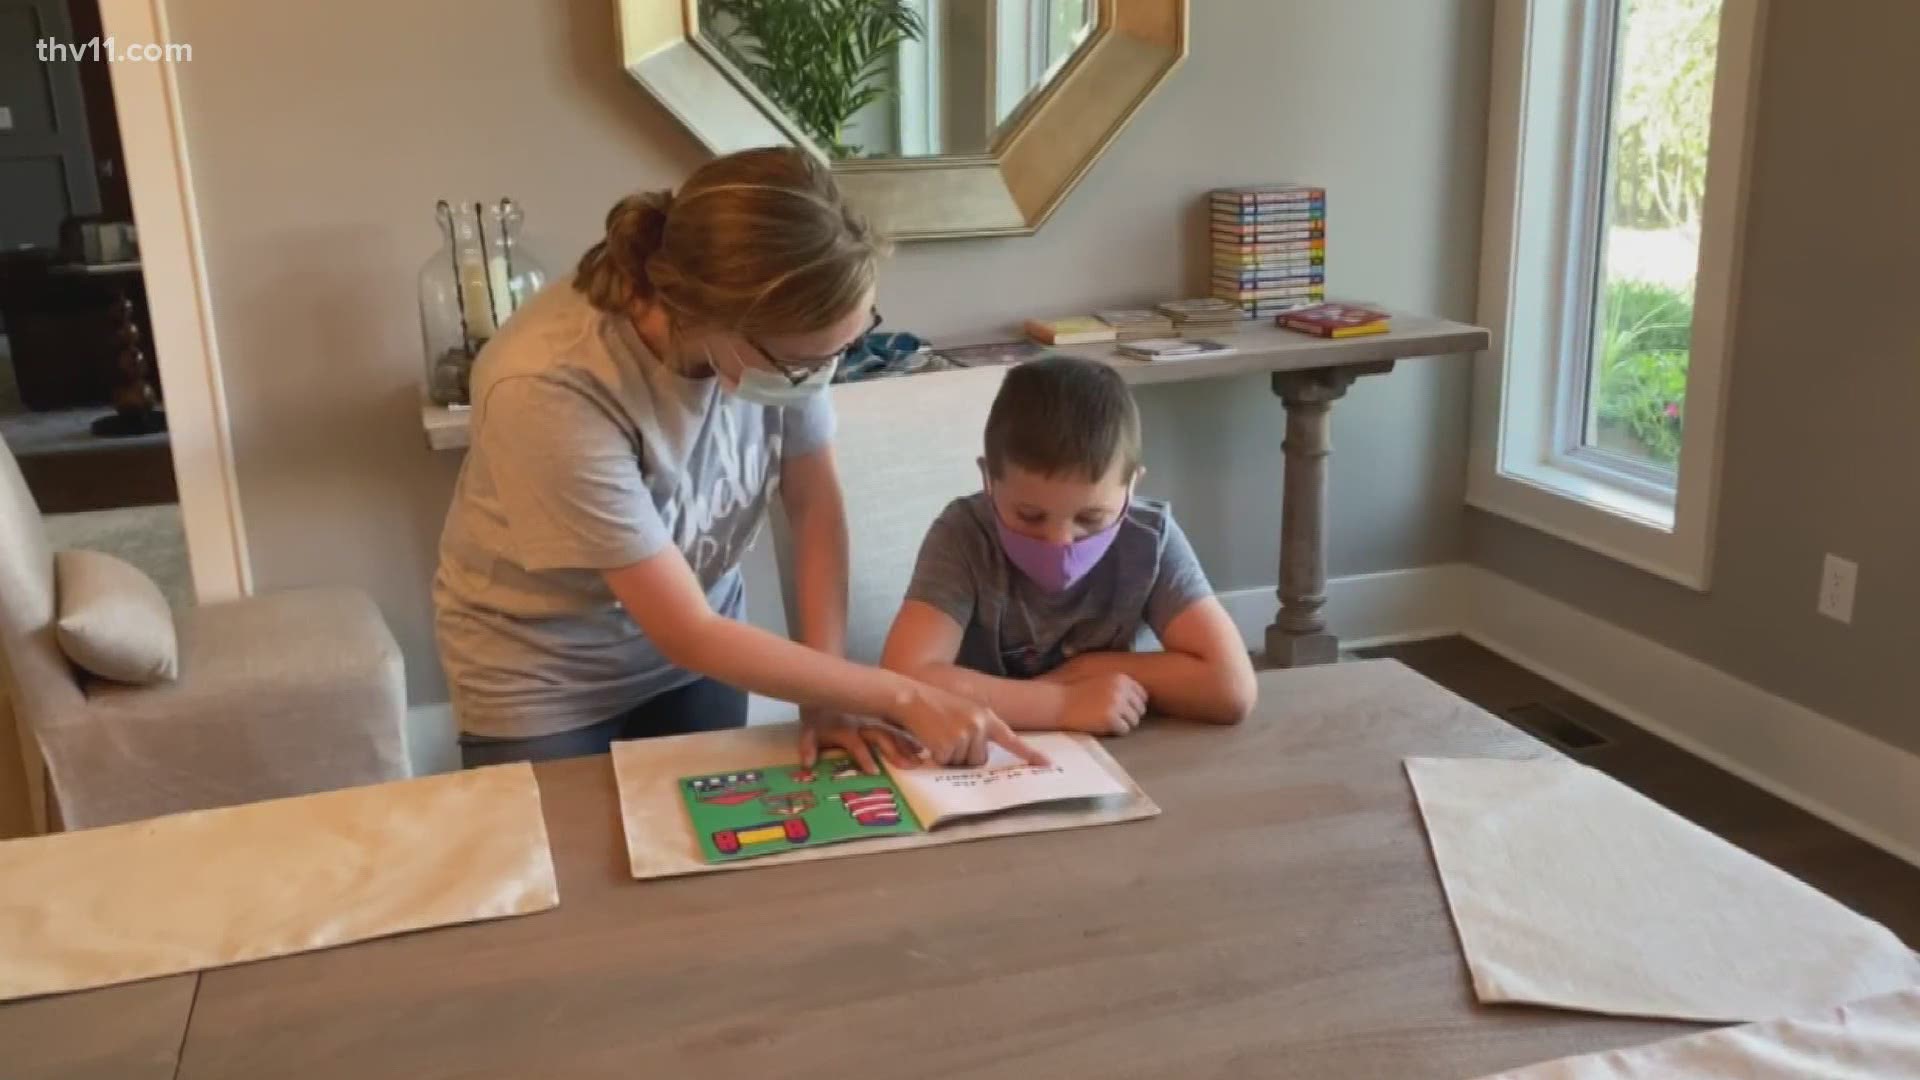 One group of siblings in Cabot used their down time to start their own family tutoring business, helping kids across central Arkansas navigate school.